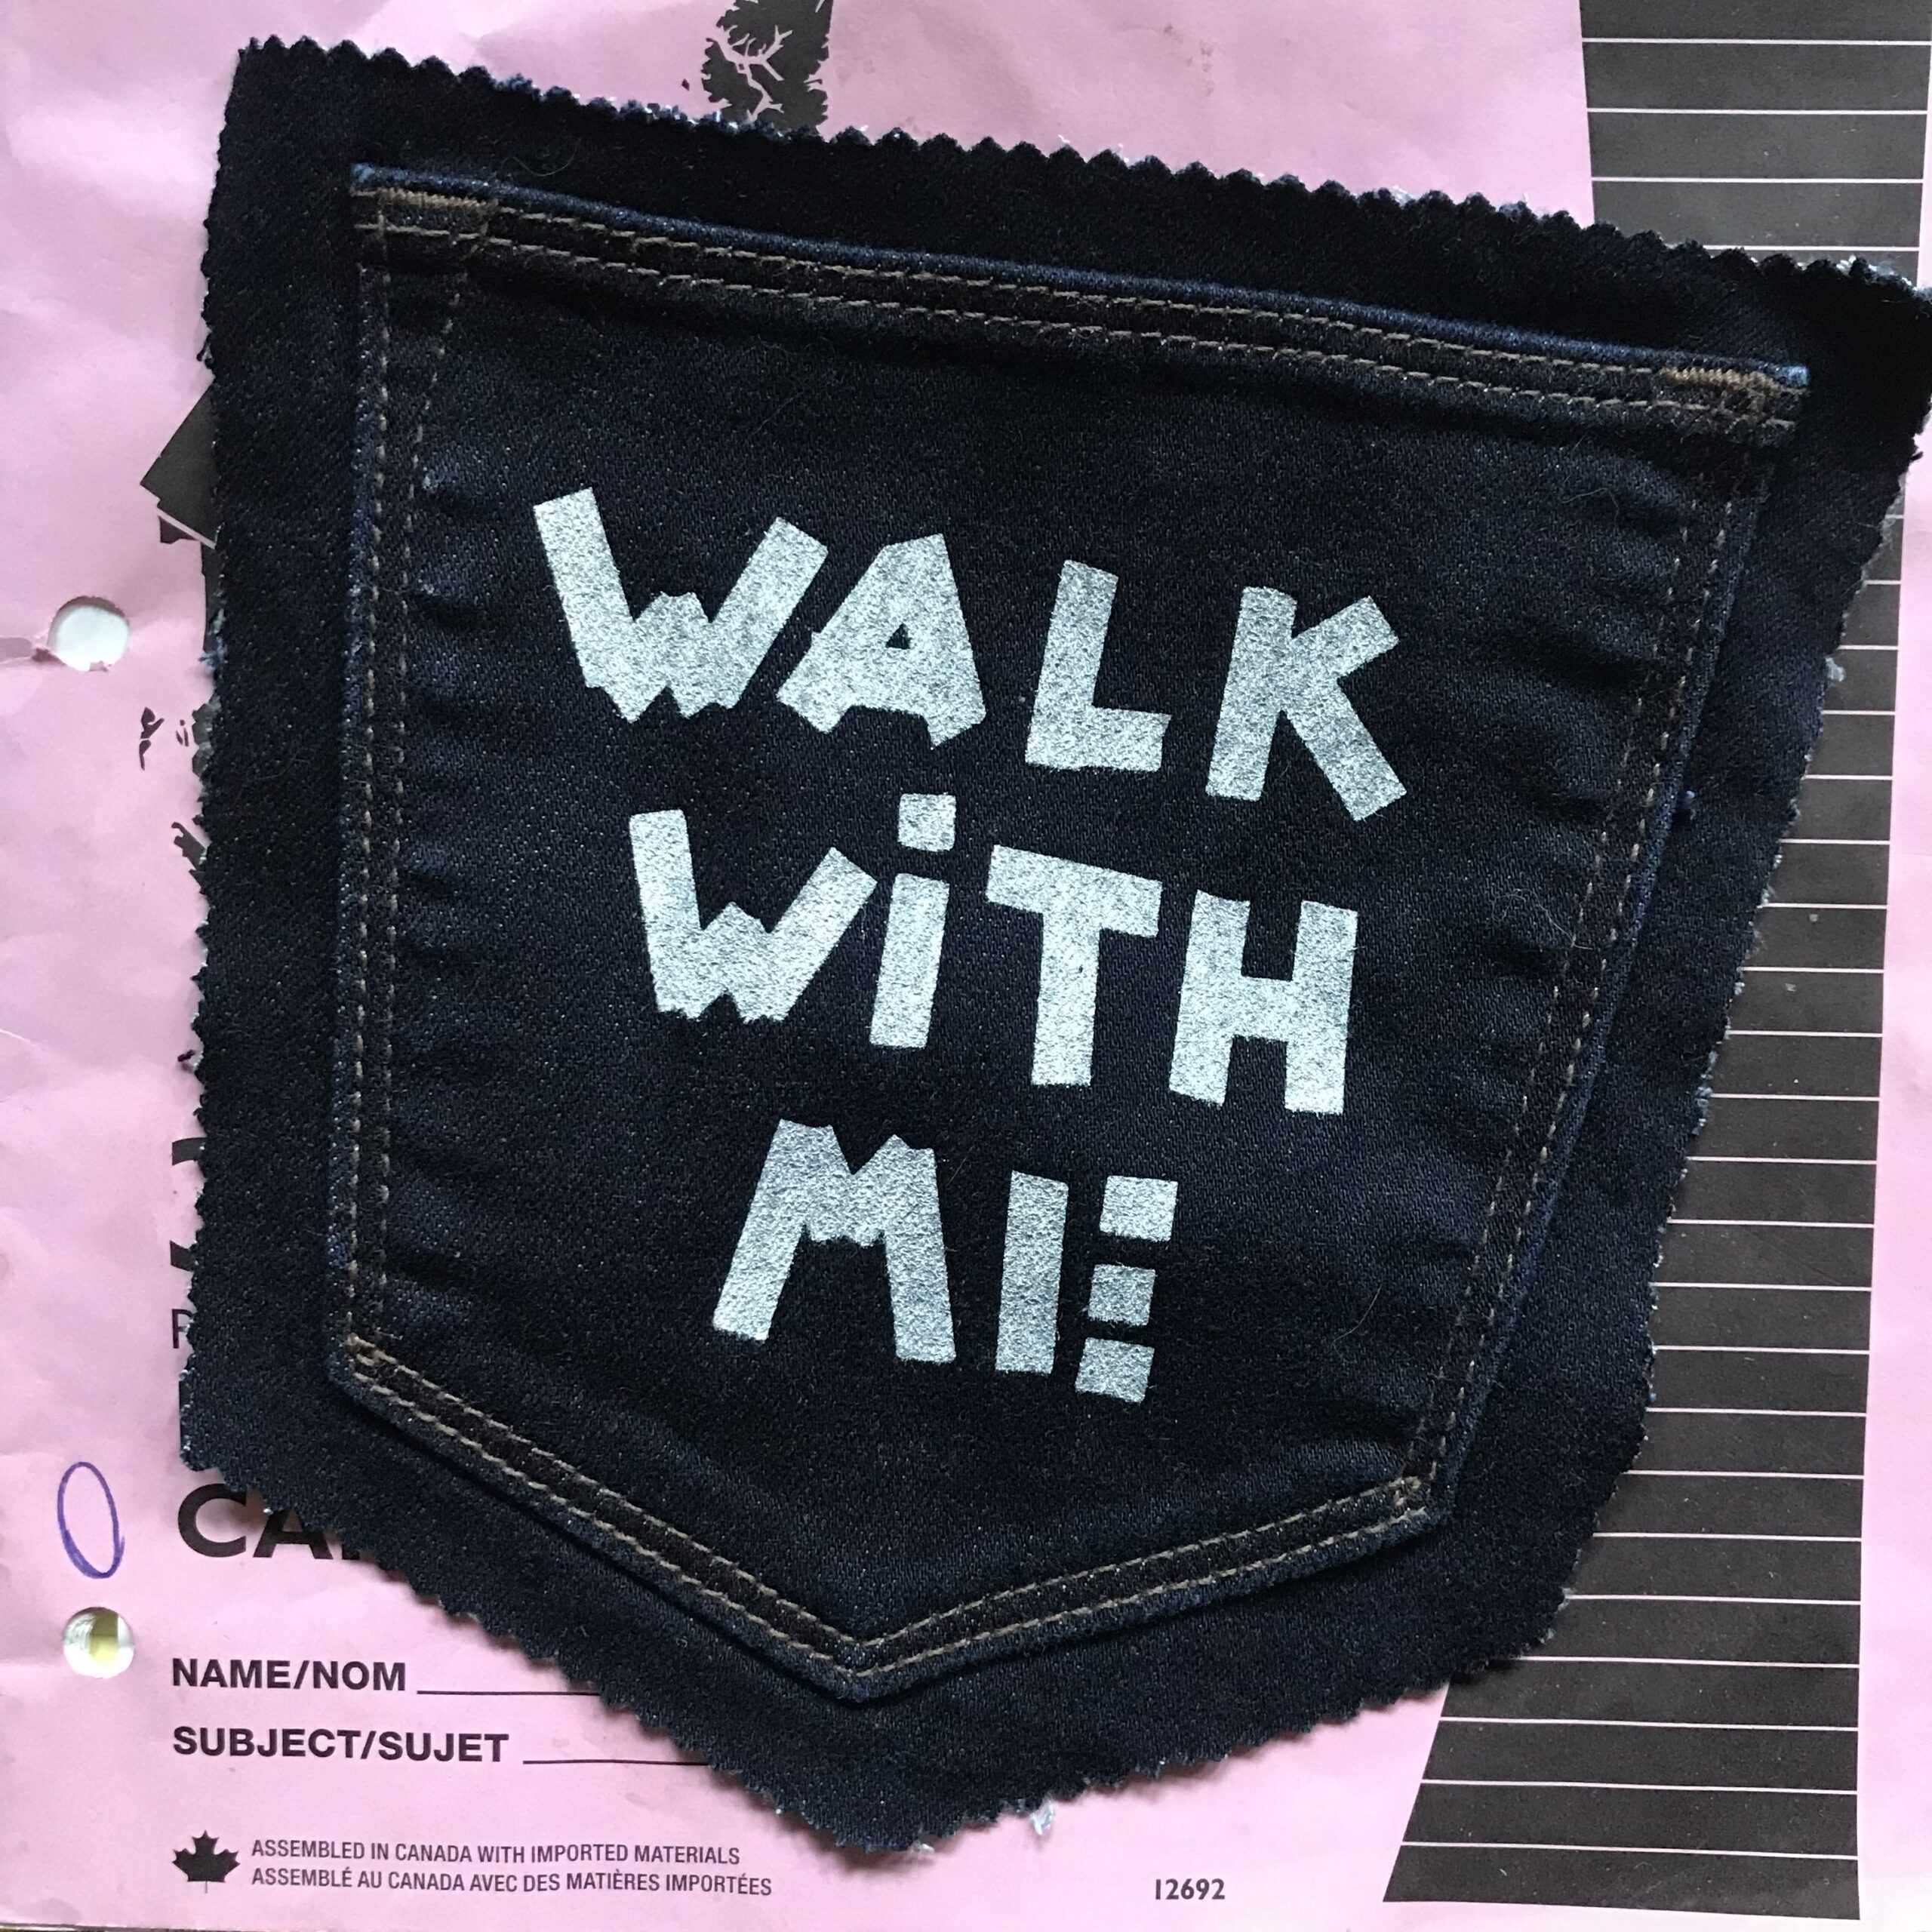 A patch reading "walk with me" promoting an exhibition at the Campbell River Art Gallery.